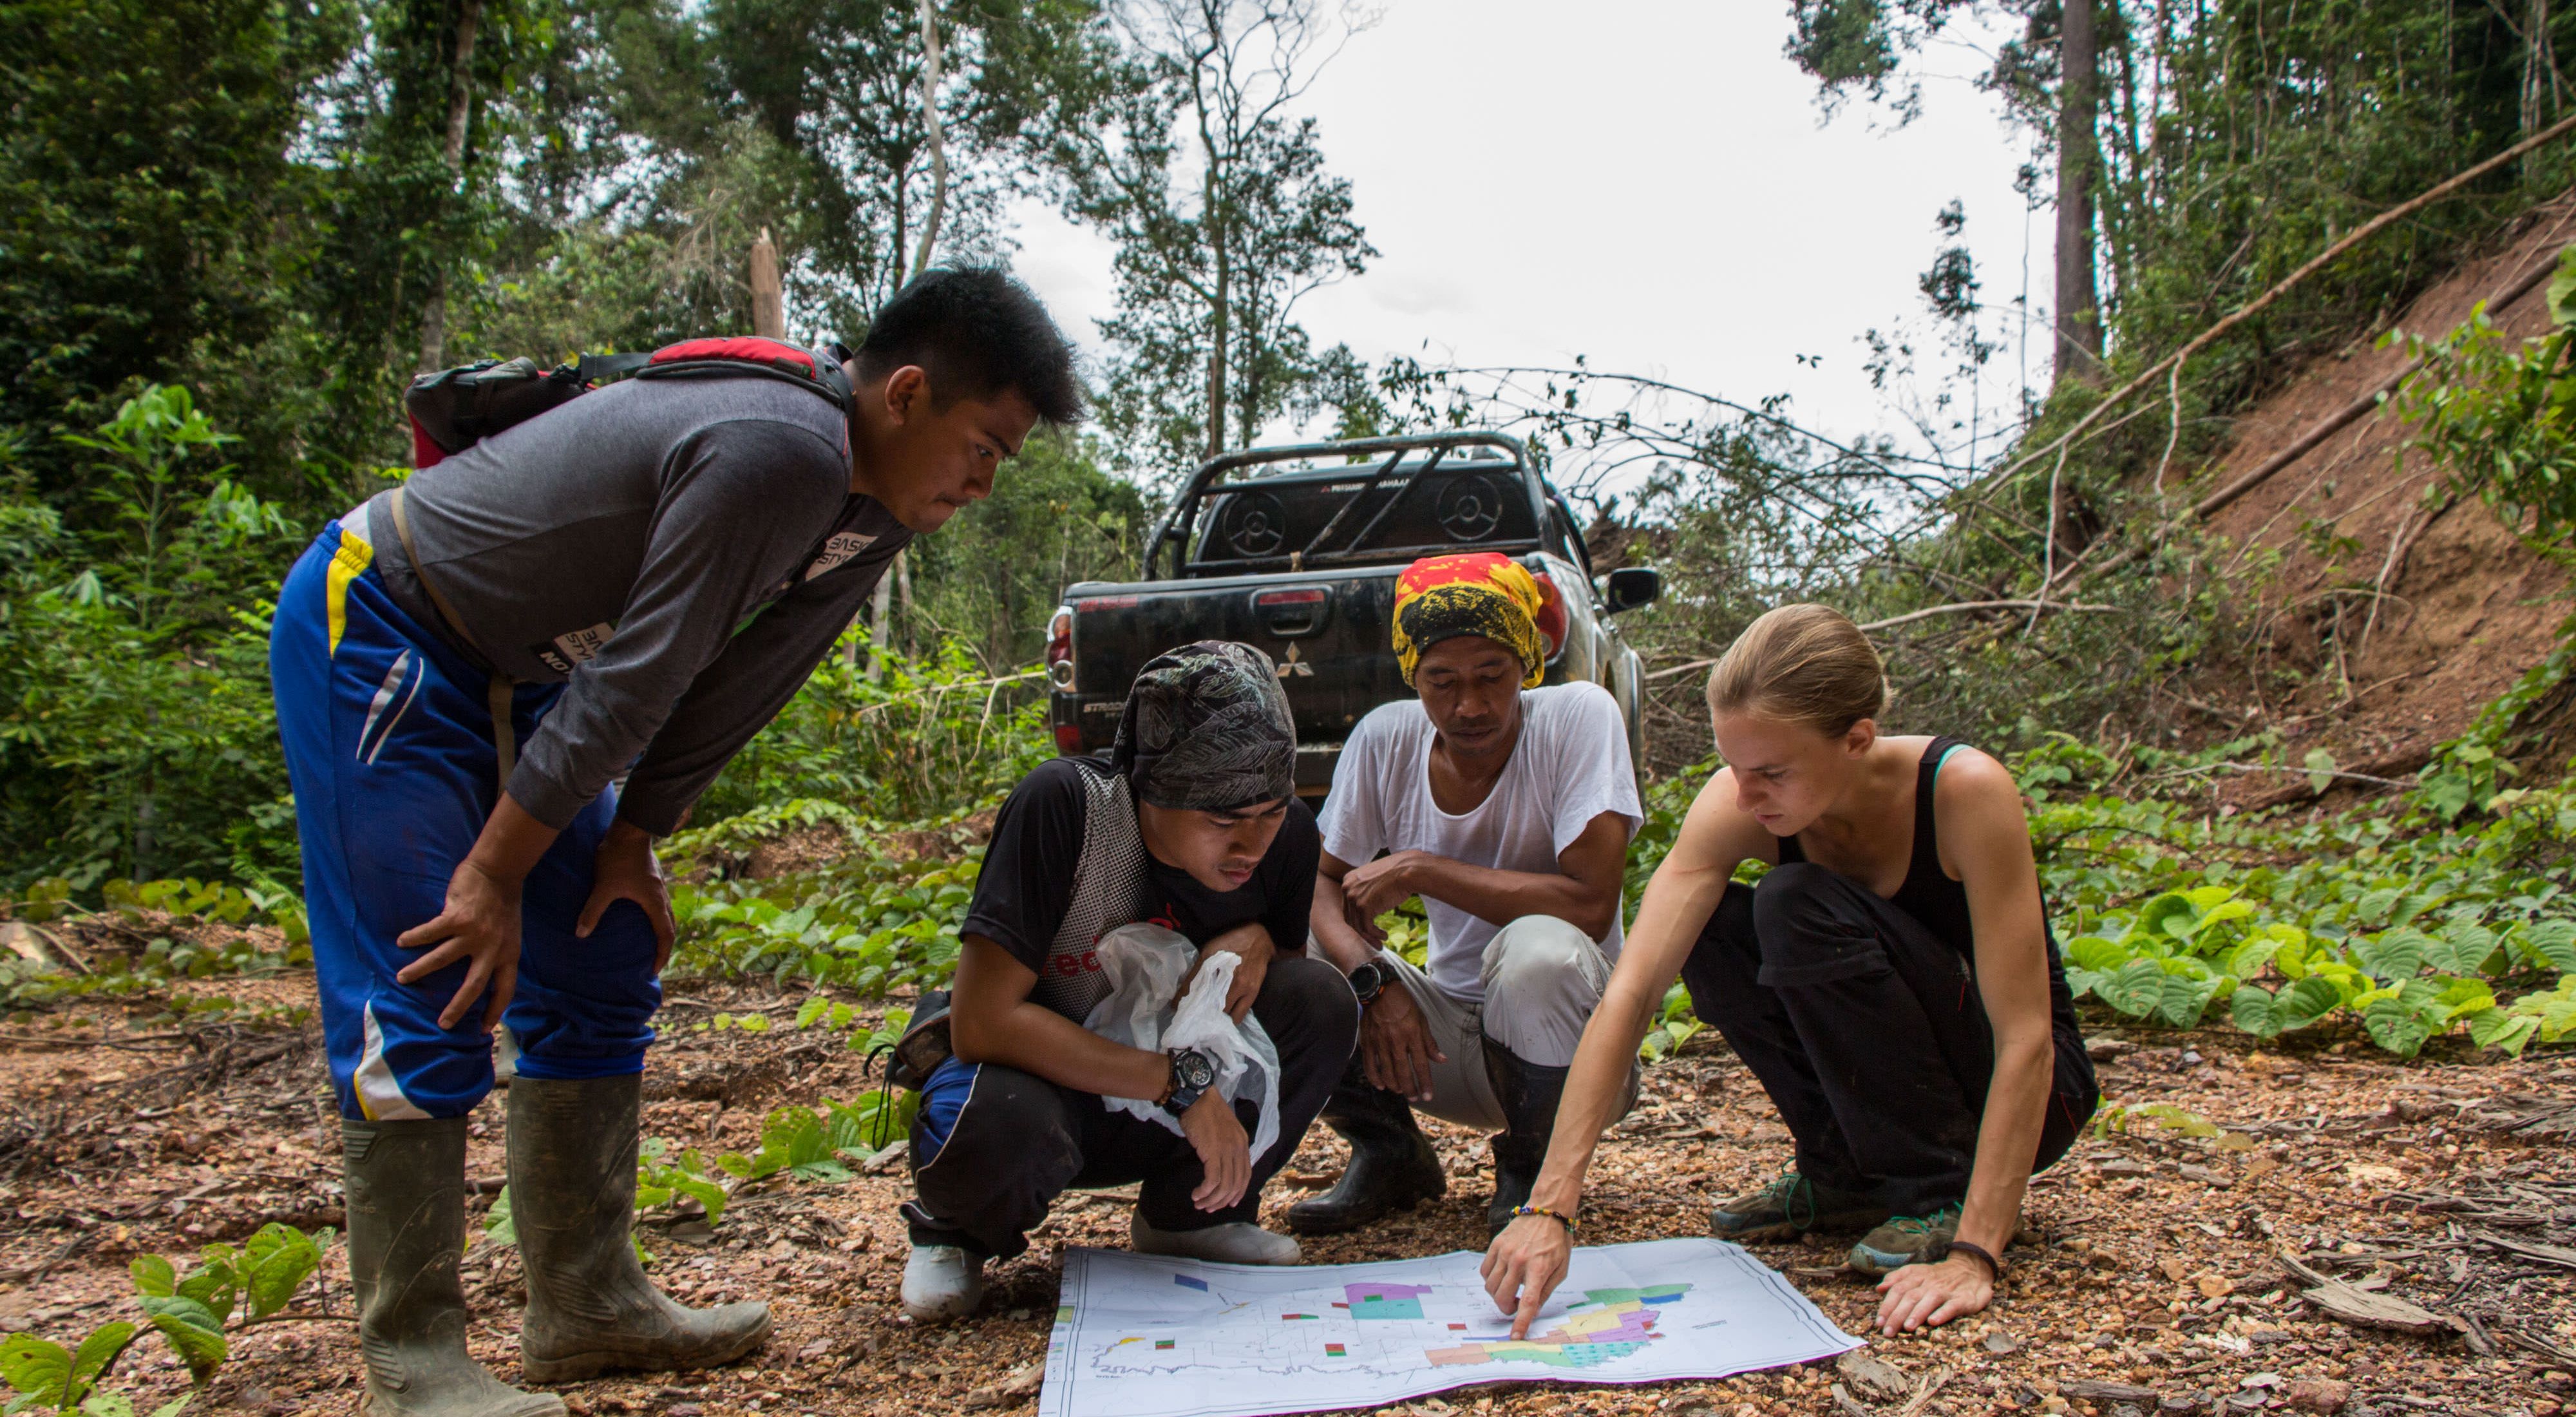 NatureNet Science Fellow Zuzana Burivalova working with local community members in Indonesia on a project using sound to monitor the health of a tropical forest.